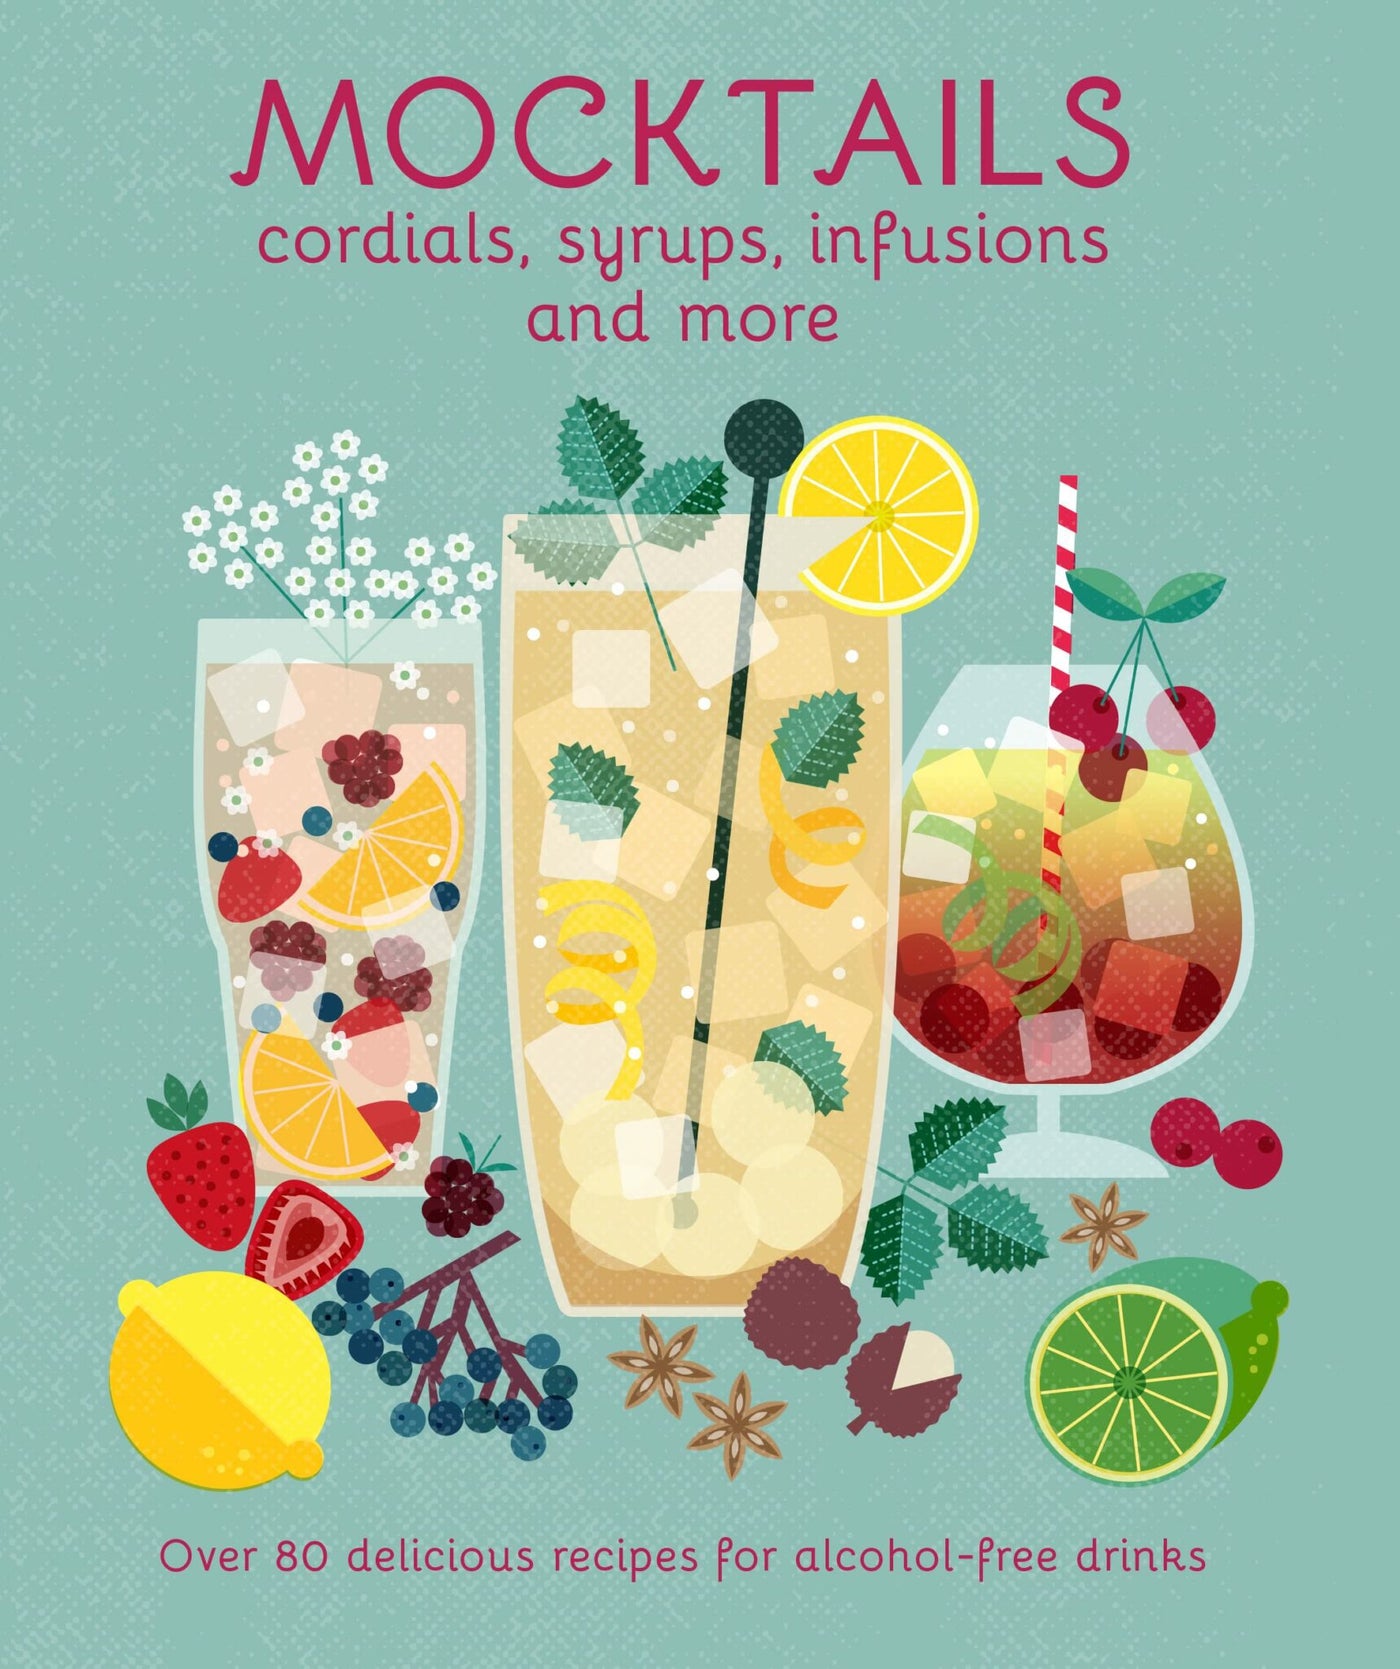 Mocktails – Cordials, Syrups, Infusions and more